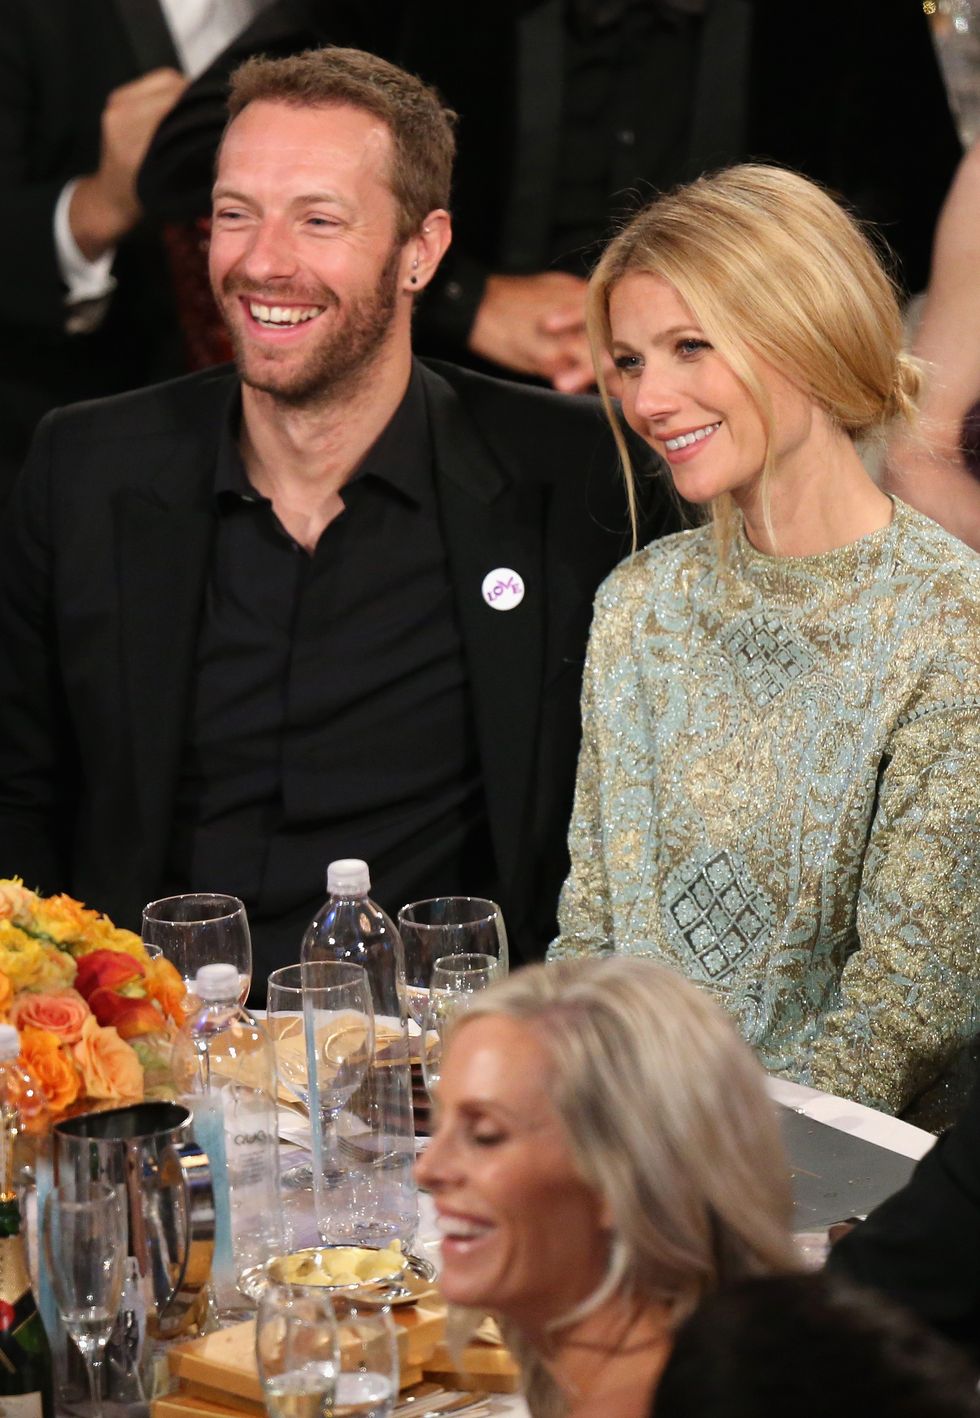 beverly hills, ca january 12 71st annual golden globe awards pictured l r singer chris martin and actress gwyneth paltrow at the 71st annual golden globe awards held at the beverly hilton hotel on january 12, 2014 photo by christopher polknbcnbcu photo banknbc